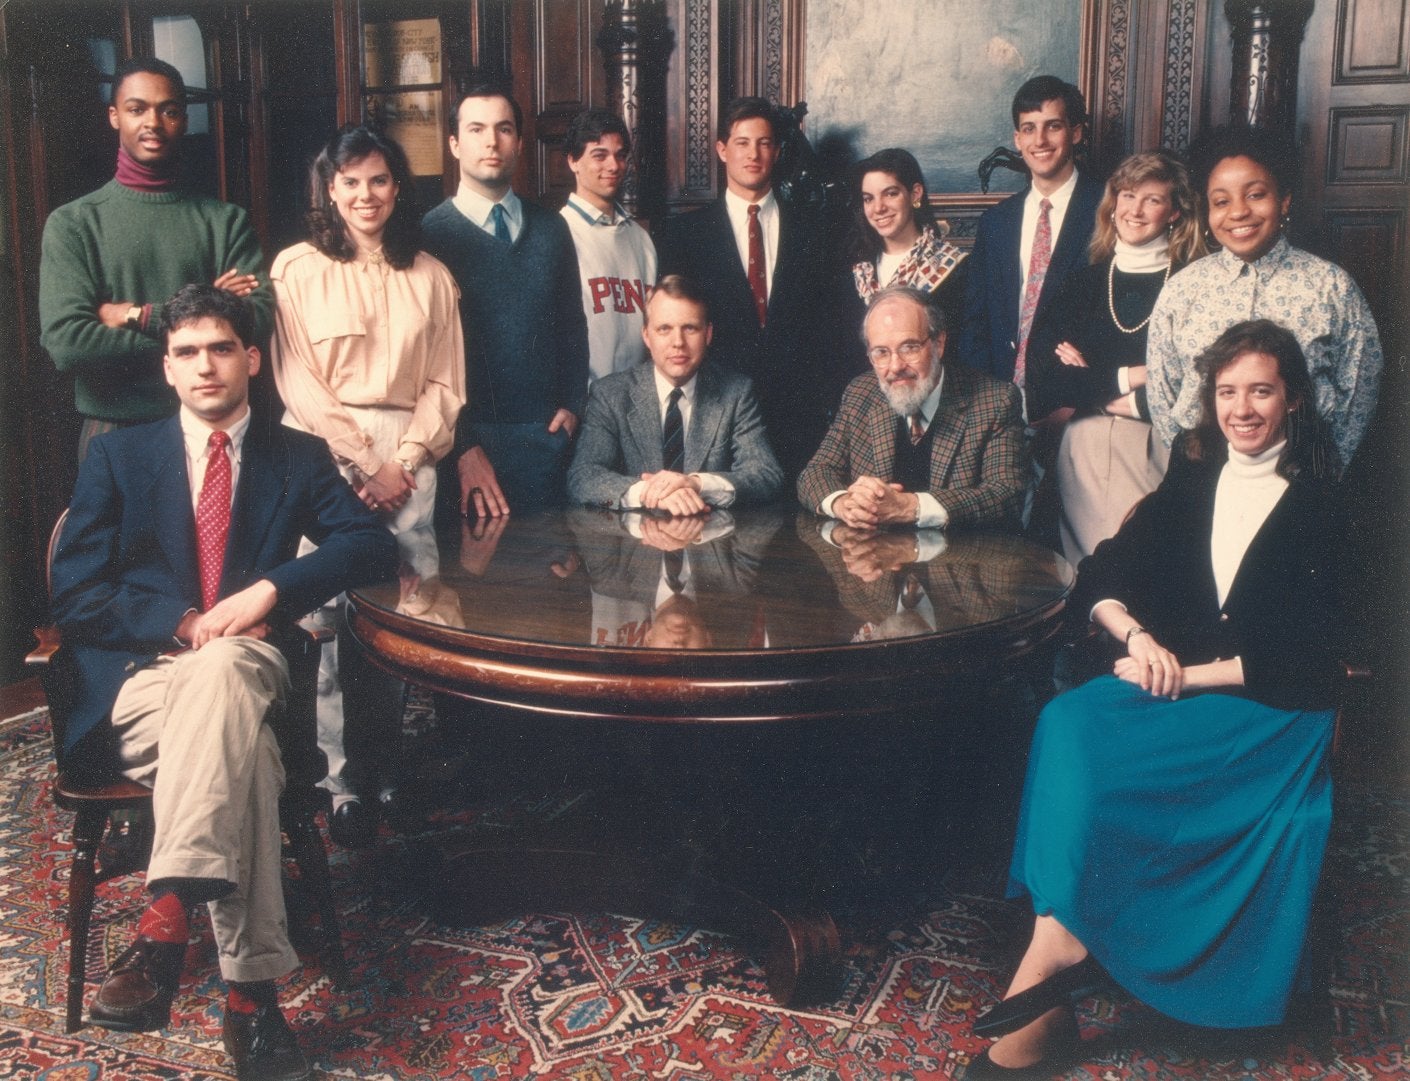 The authors and editors of A Pennsylvania Album in the Henry Charles Lea Library of the University of Pennsylvania. Seated at the table from left to right, James A. Bessin, Mark Frazier Lloyd, Richard Slator Dunn and Elizabeth A. Linck. Standing, from left to right, Marvin P. Lyon, Jr., Denise Pieczynski, Mark J. Drozdowski, Michael G. Dubrow, Andrew K. Becker, Lisa M. Silverman, Jonathan S. Bennett, Michelle A. Woodson, and Adele Cecelia Moore